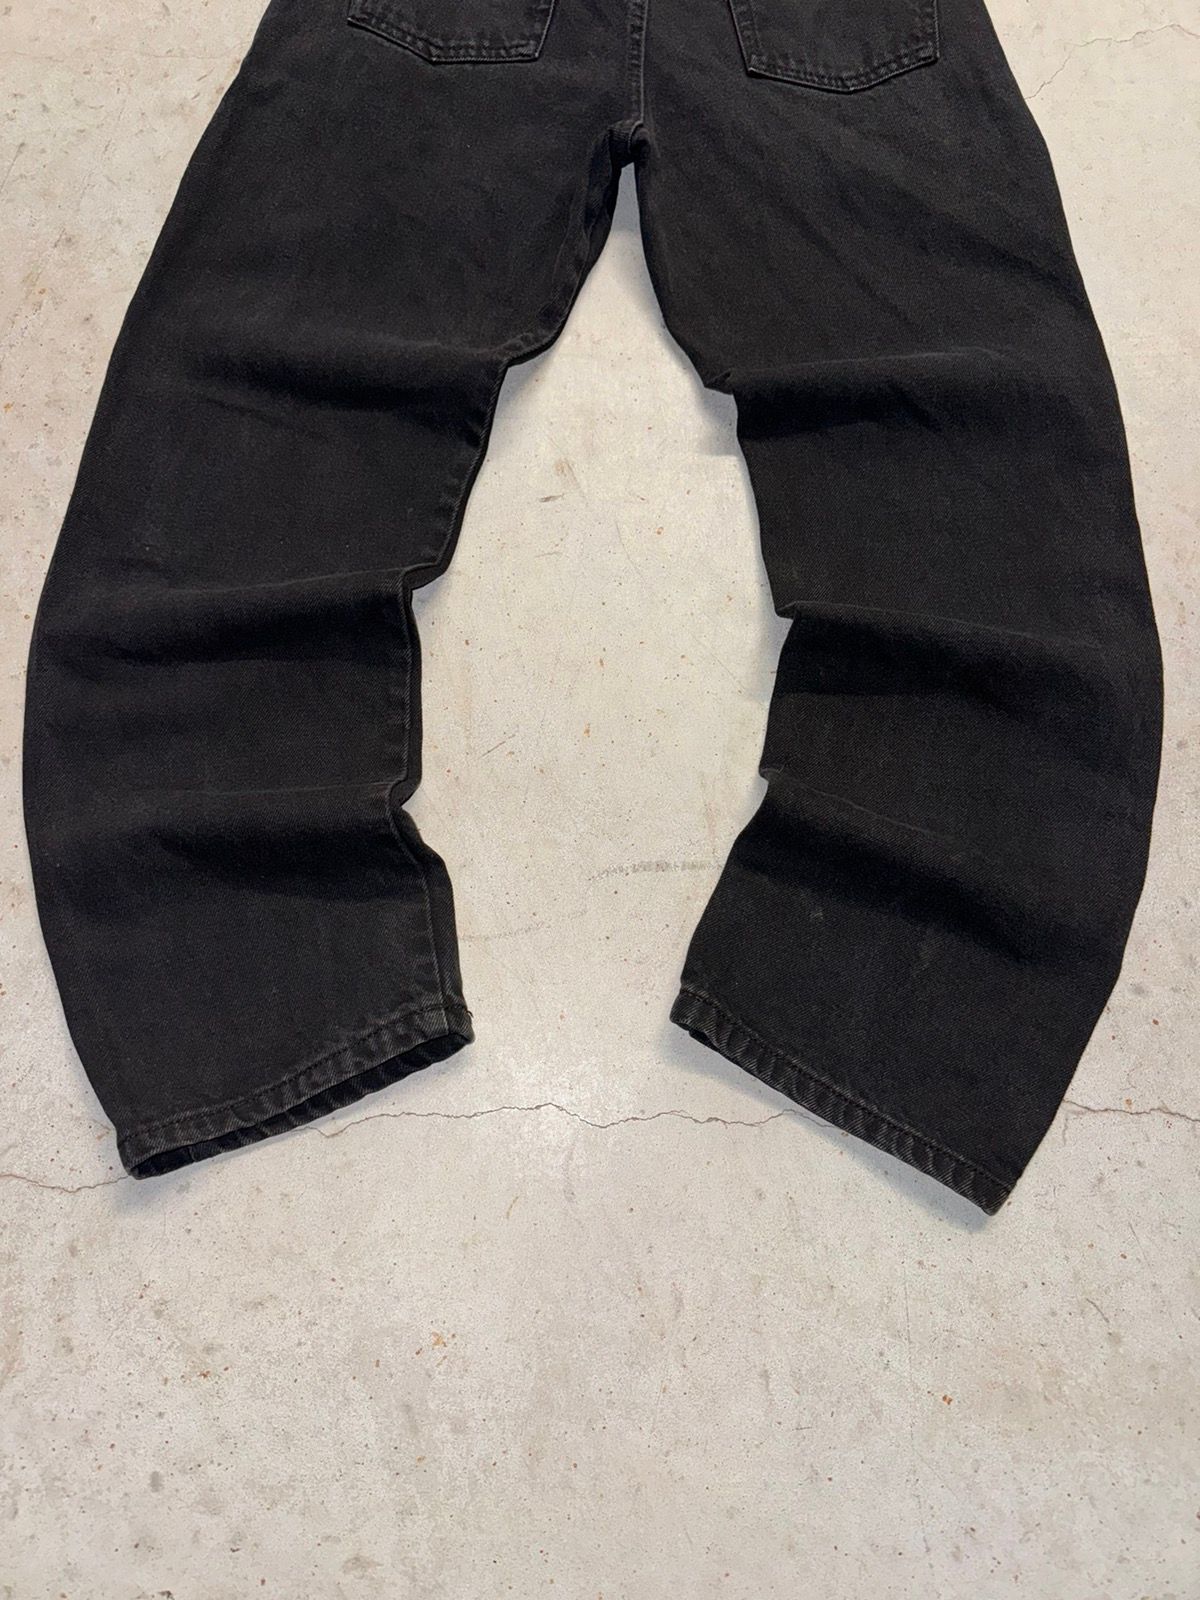 Vintage Crazy Vintage 90s Carhartt Style Faded Black Baggy Jeans Size US 31 - 5 Thumbnail